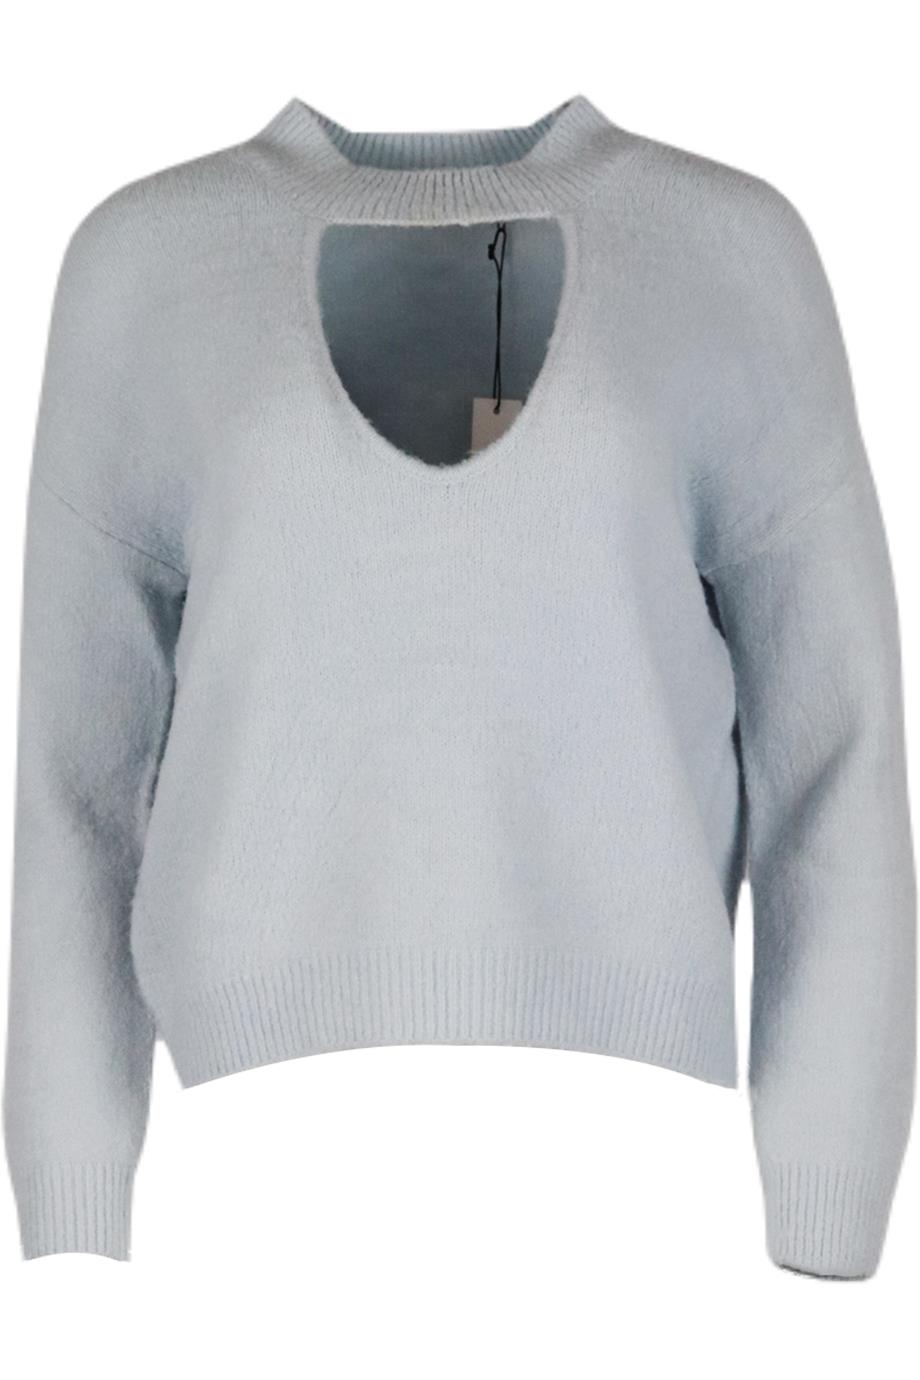 ONE GREY DAY CUTOUT BRUSHED KNITTED SWEATER SMALL